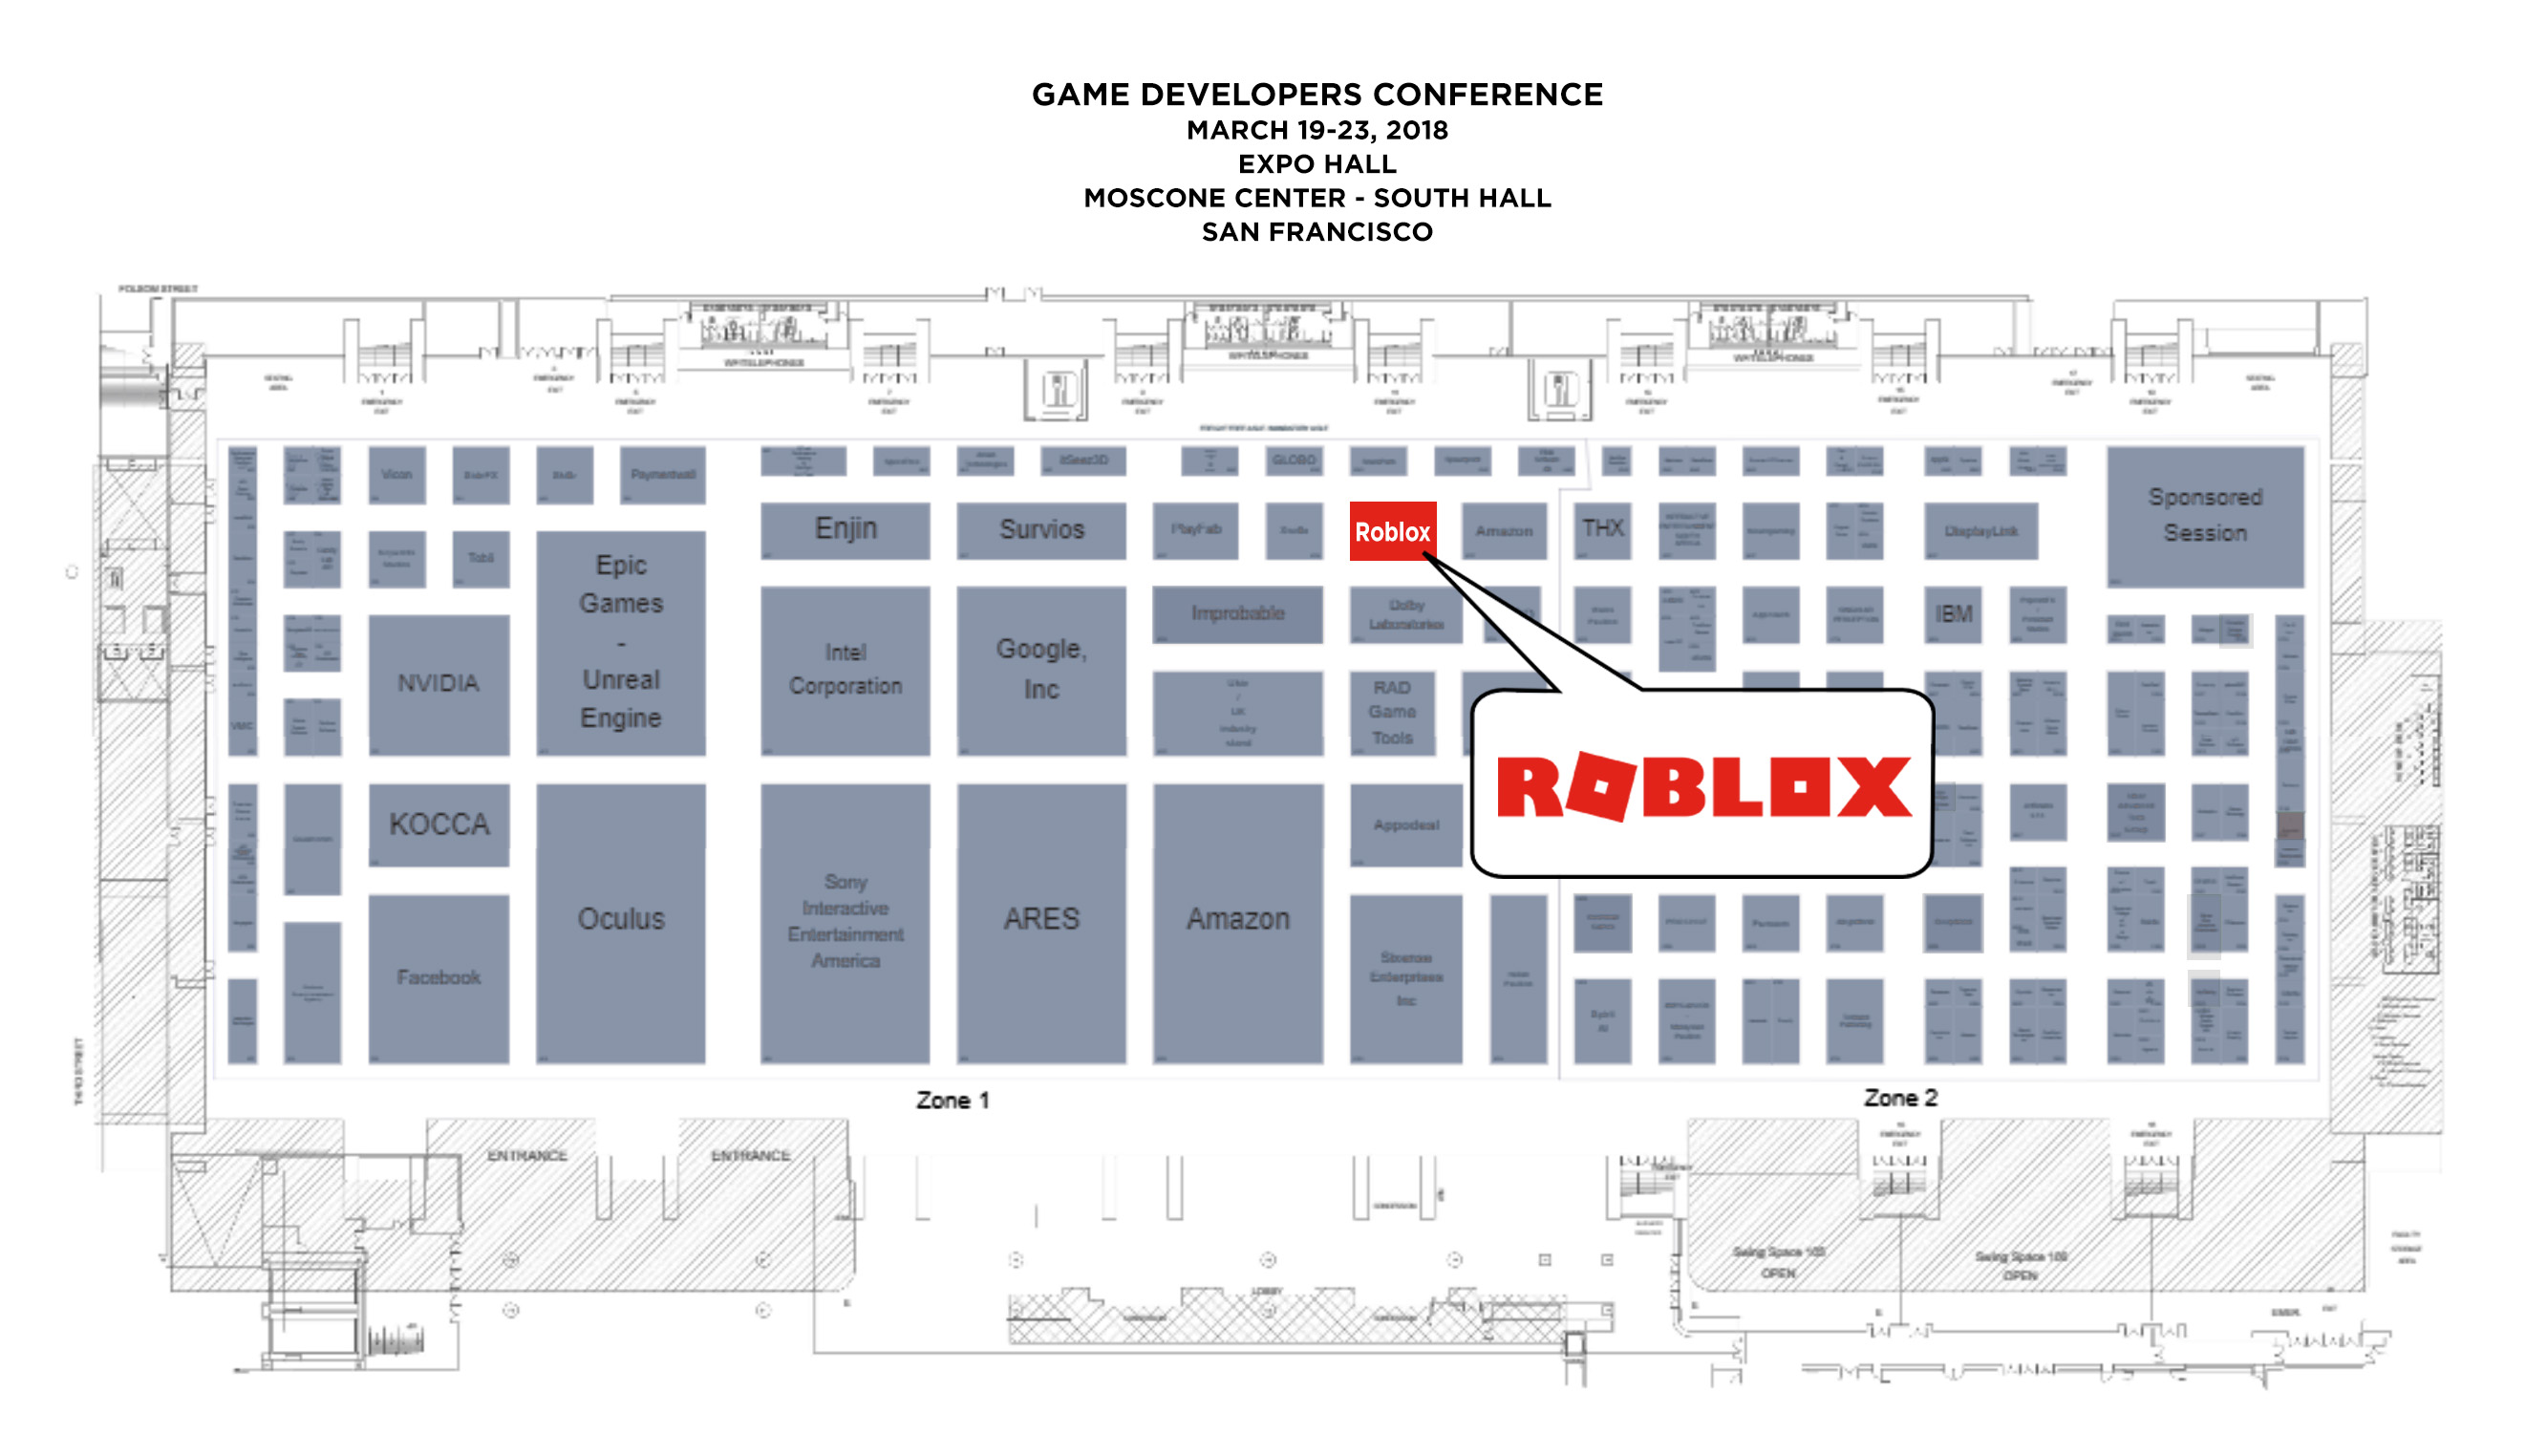 Connect With Roblox At Gdc 2018 Roblox Blog - roblox photo booth